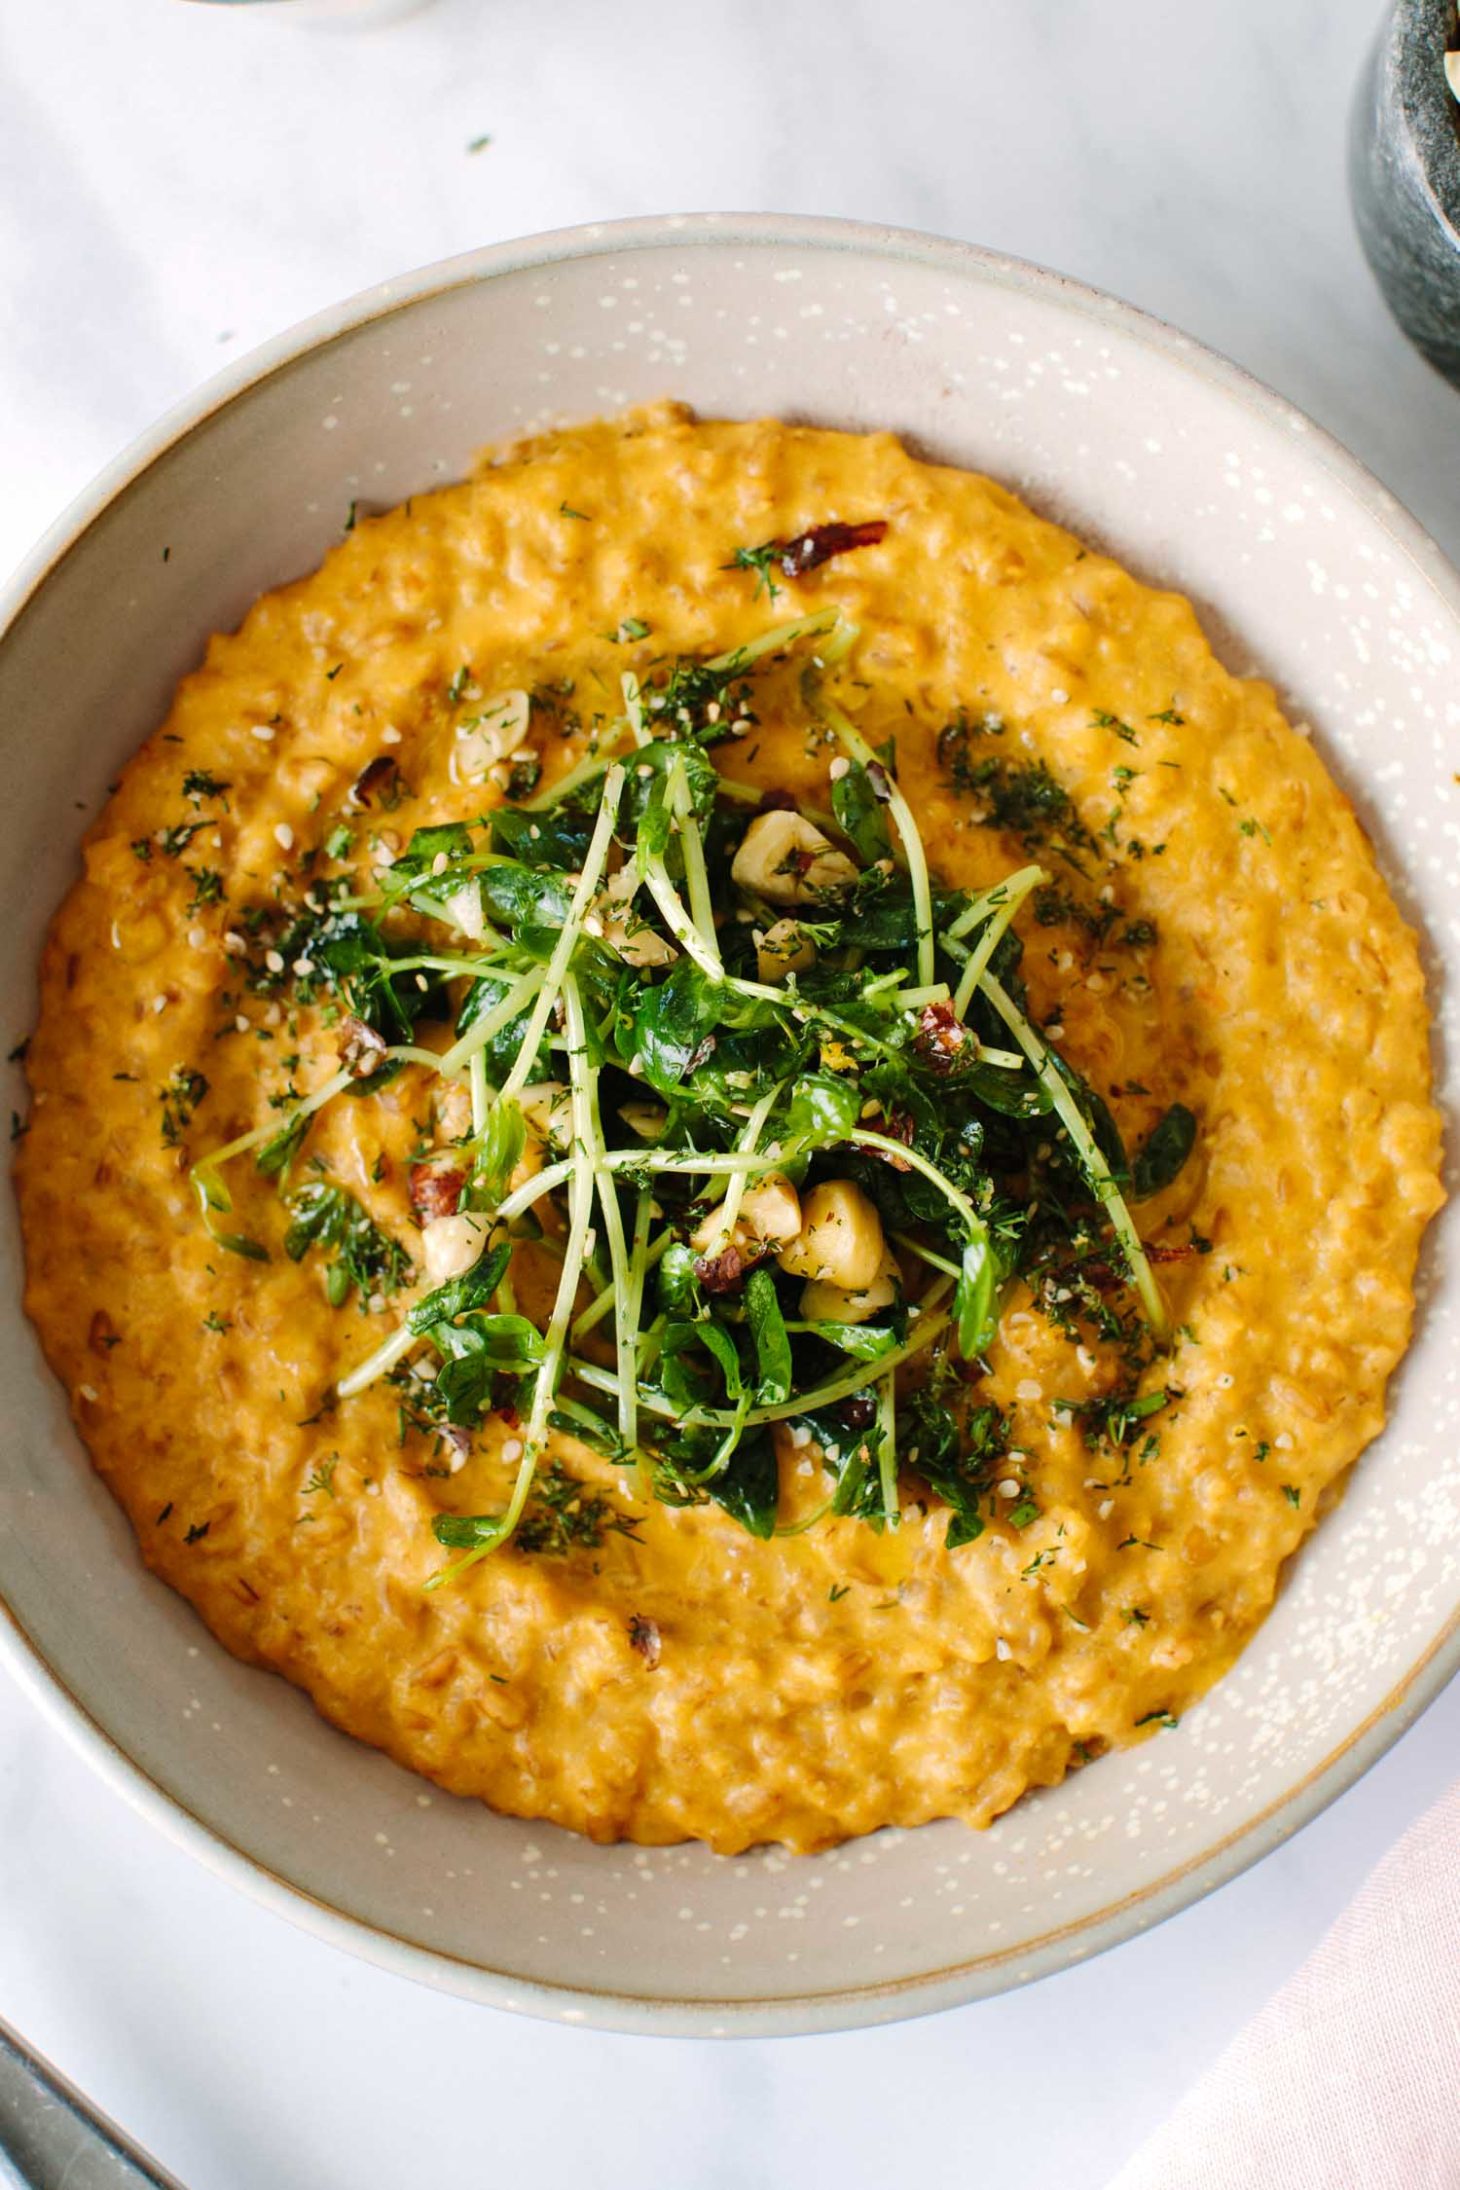 Sunflower Carrot Risotto with Hazelnut-Pea Shoots